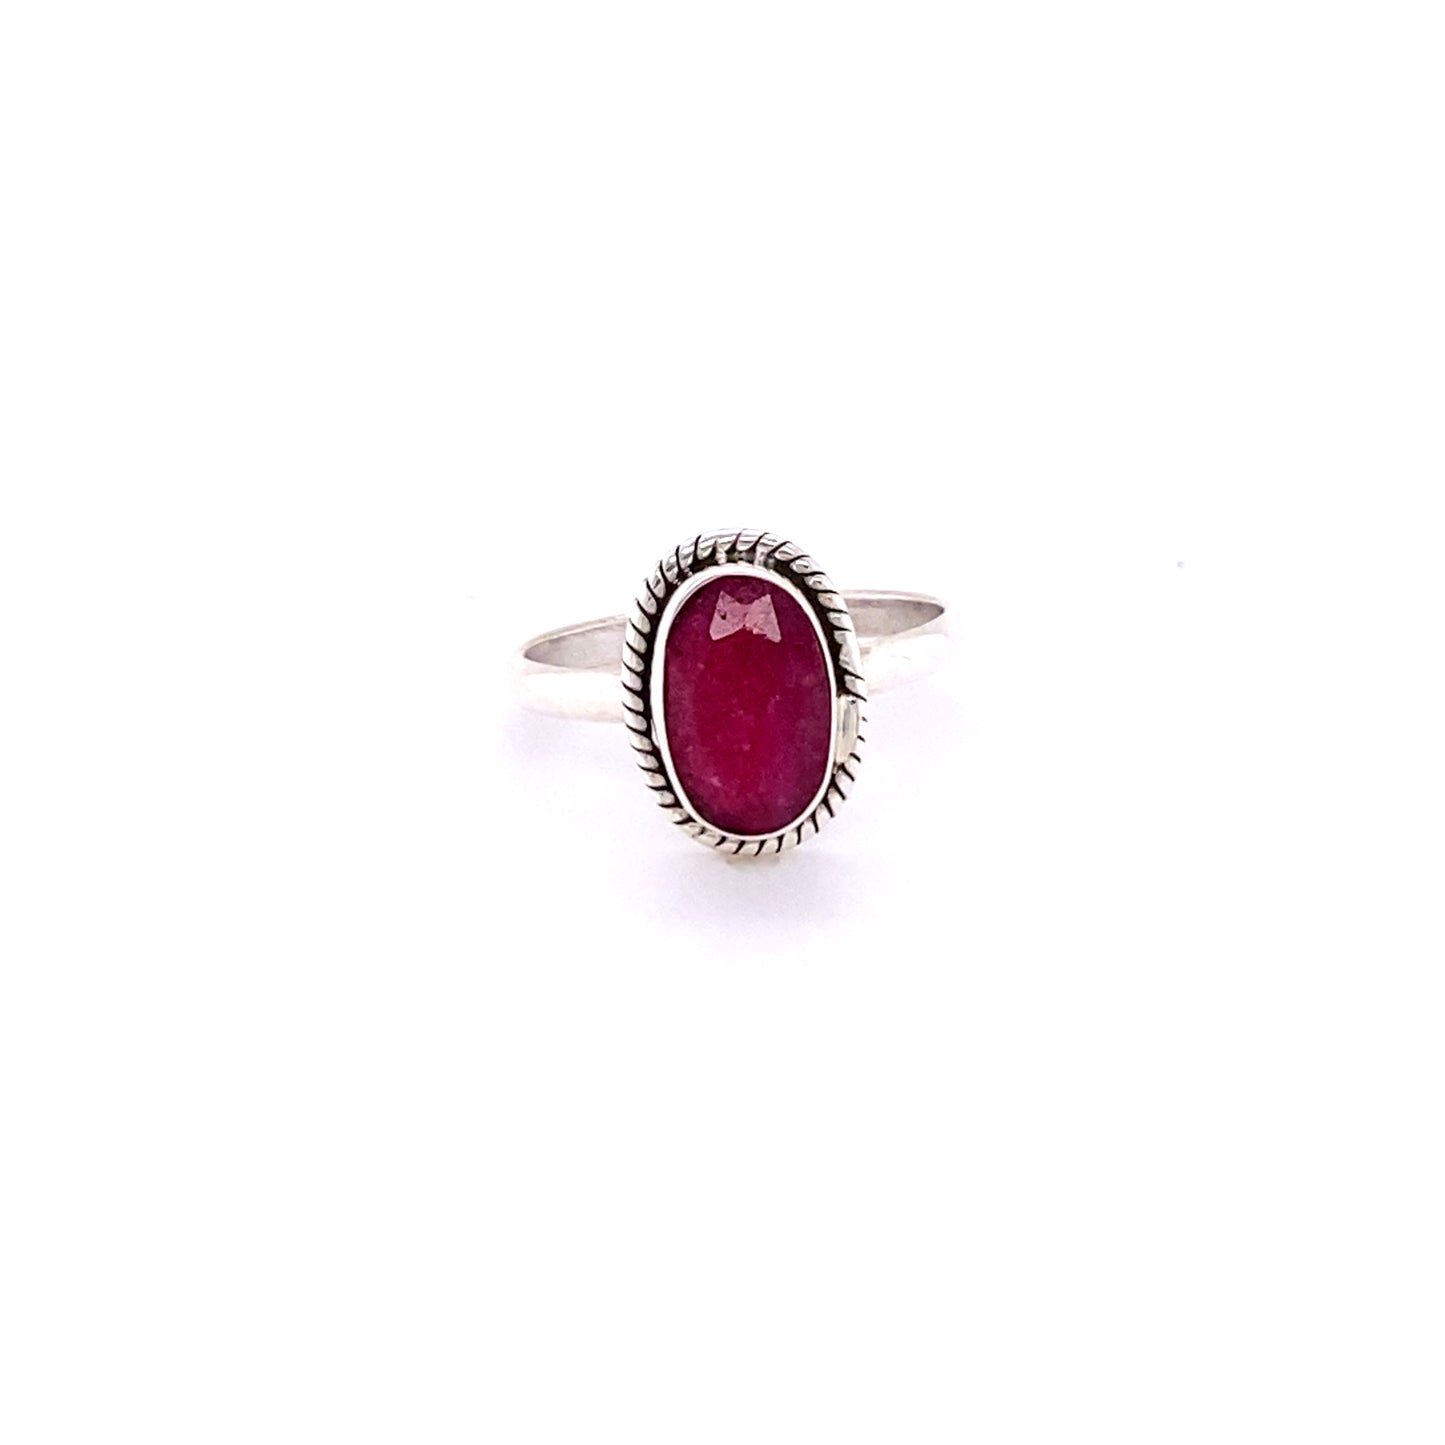 A Simple Oval Gemstone Ring with Twisted Rope Boarder.